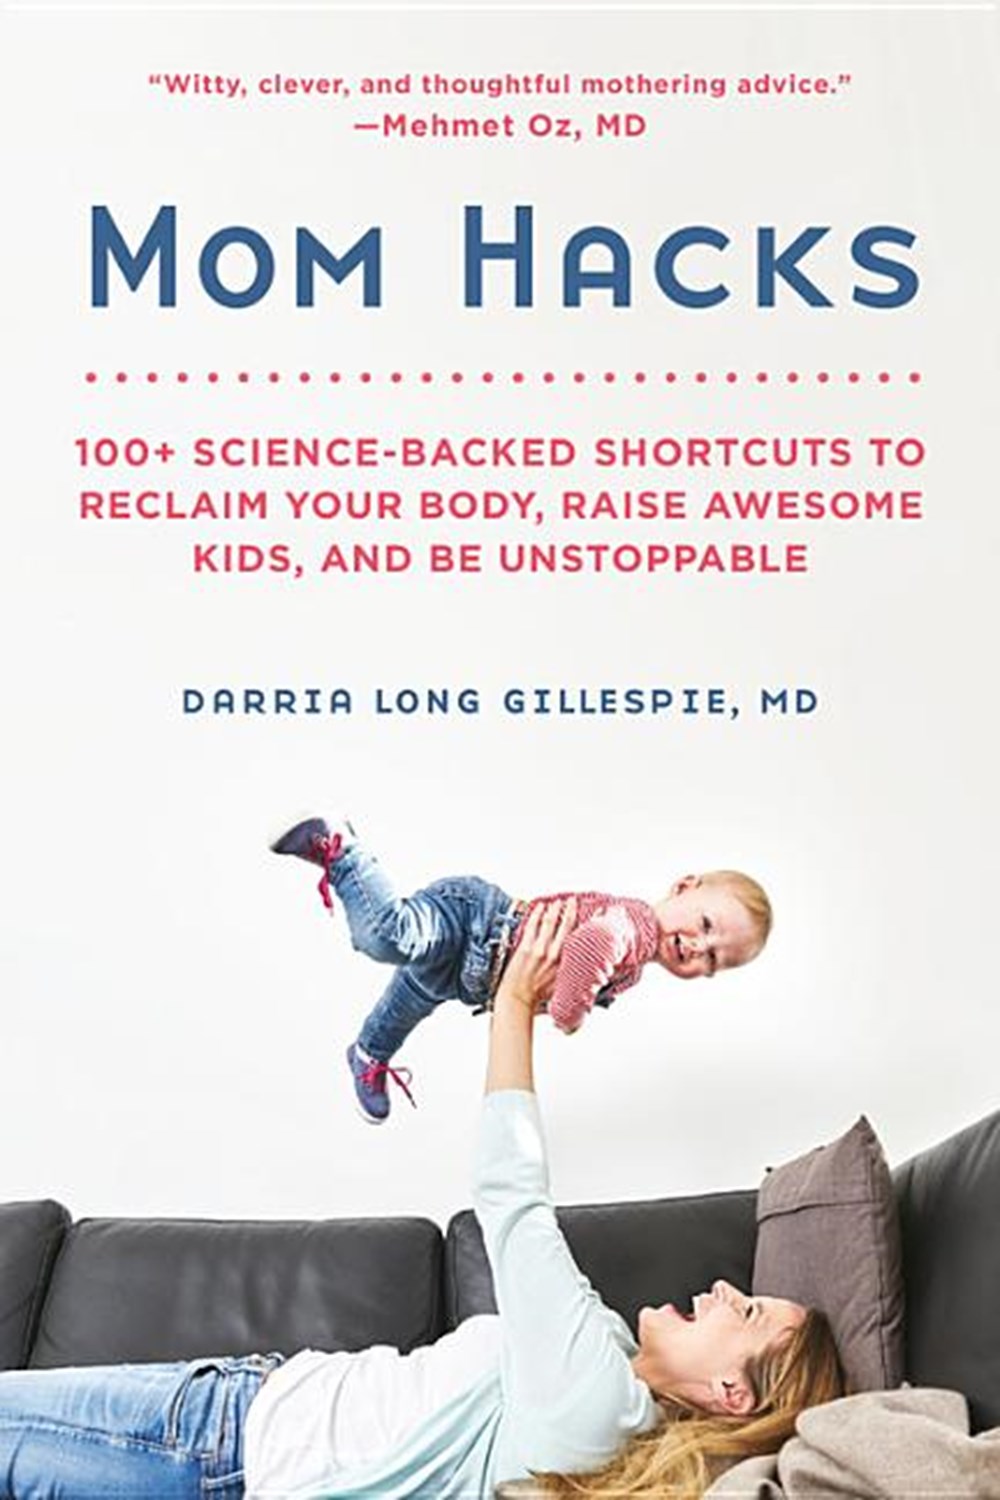 Mom Hacks: 100+ Science-Backed Shortcuts to Reclaim Your Body, Raise Awesome Kids, and Be Unstoppabl